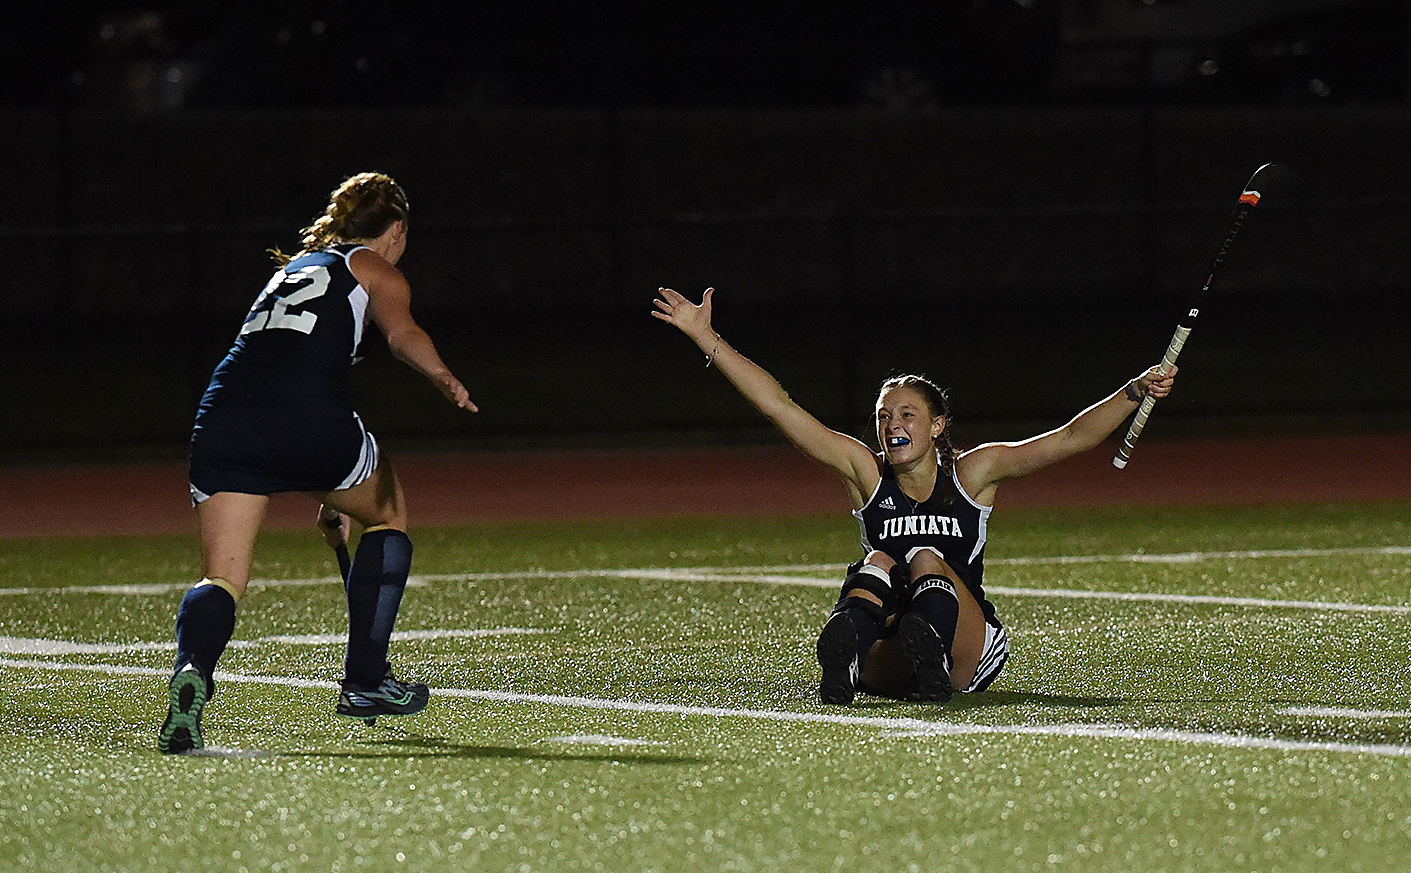 Field Hockey Triumph's in OT to Earn First Win of the Year